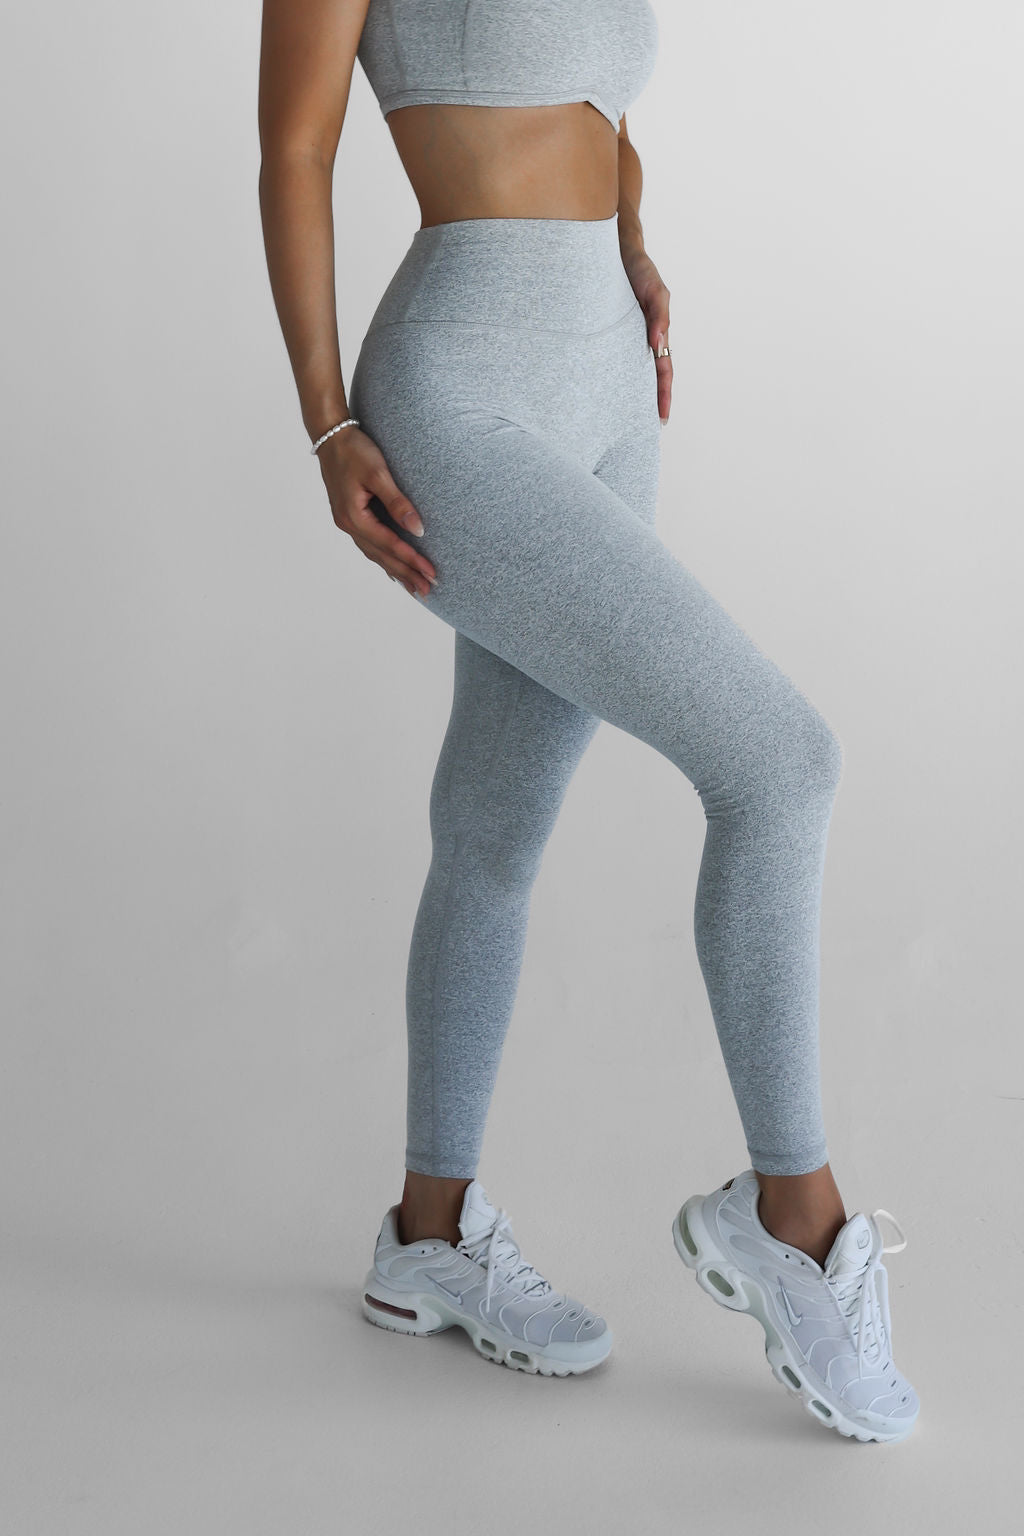 Signature Proof, Full Leggings Marl Star High Rated Length Squat 5 - Grey, Waisted,